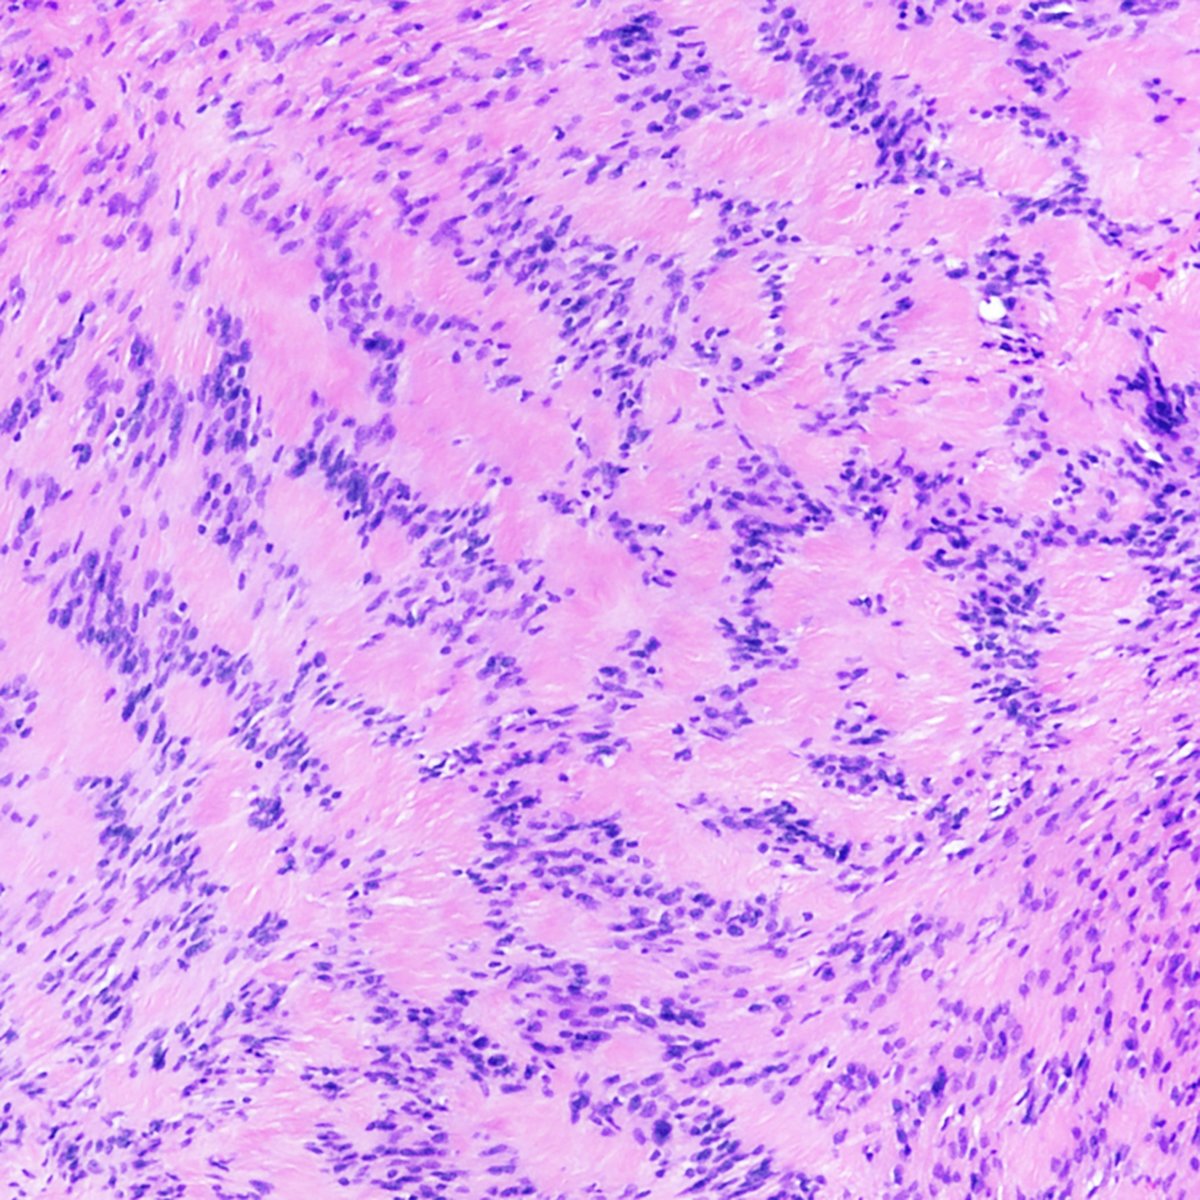 One image is all you need of this paraspinous tumor. Diagnosis? #pathology #neuropath #pathtwitter